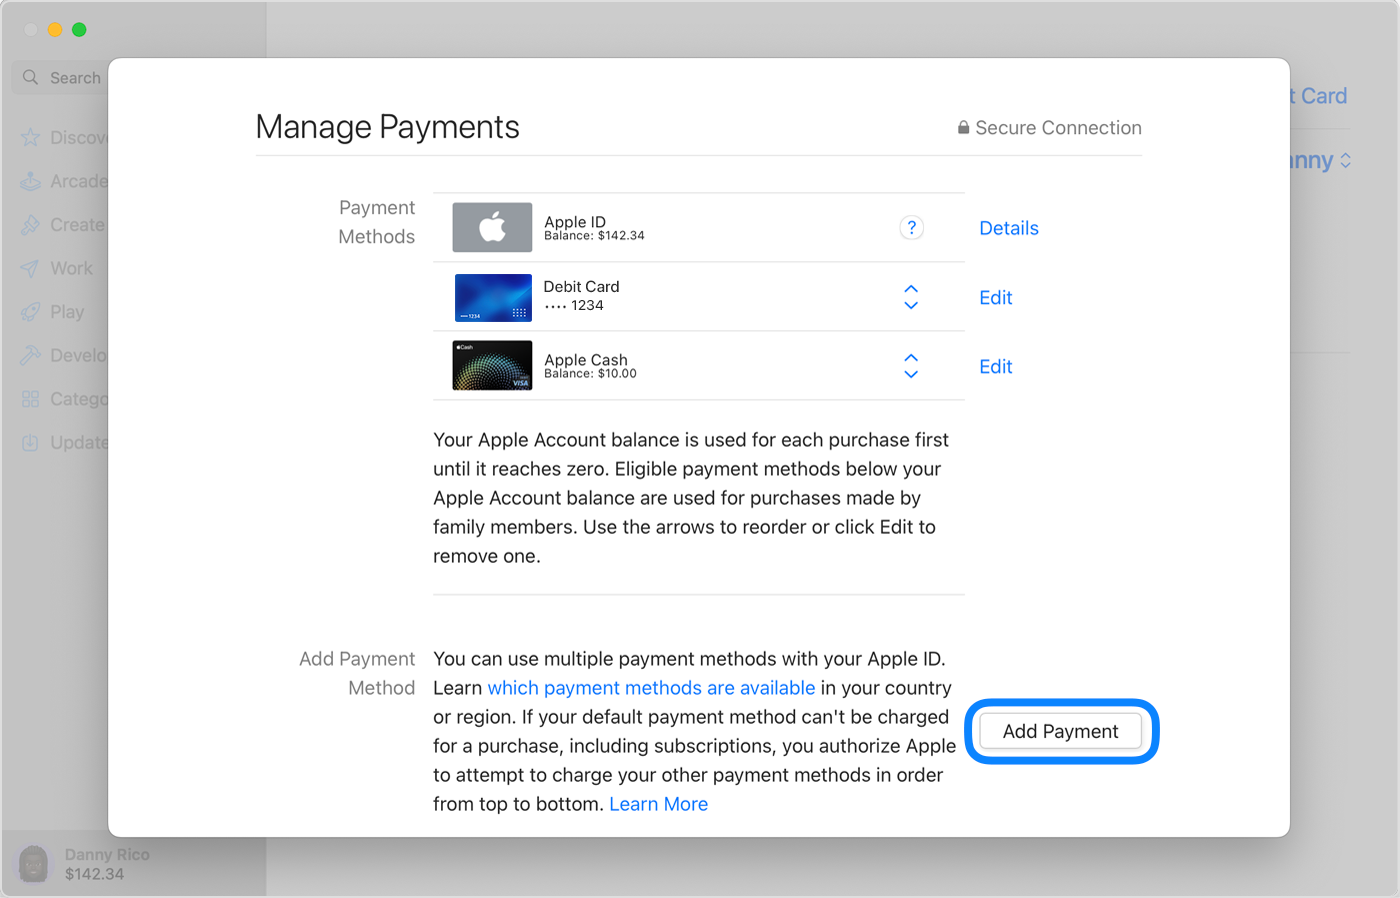 How To Update Credit Card Information on Apple ID and Apple Pay